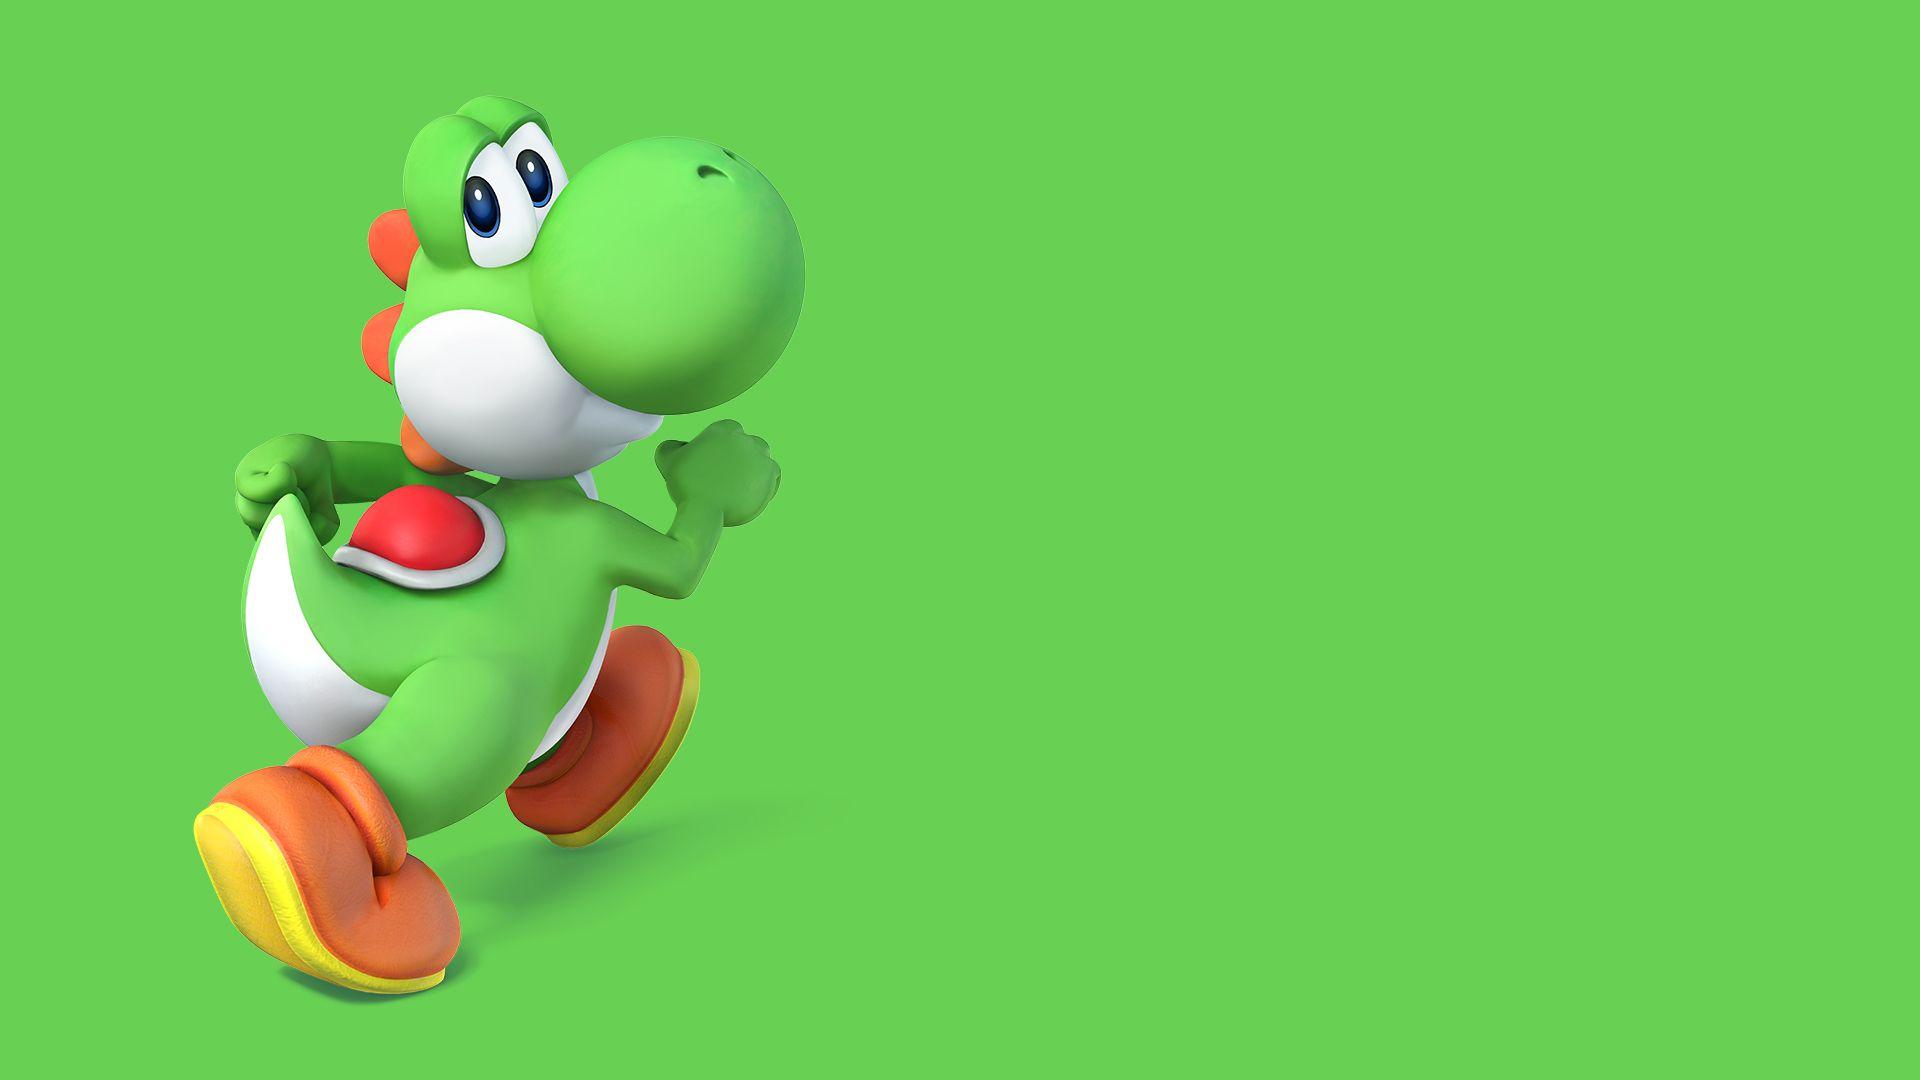 Newest For Cute Yoshi Wallpaper Iphone Lee Dii